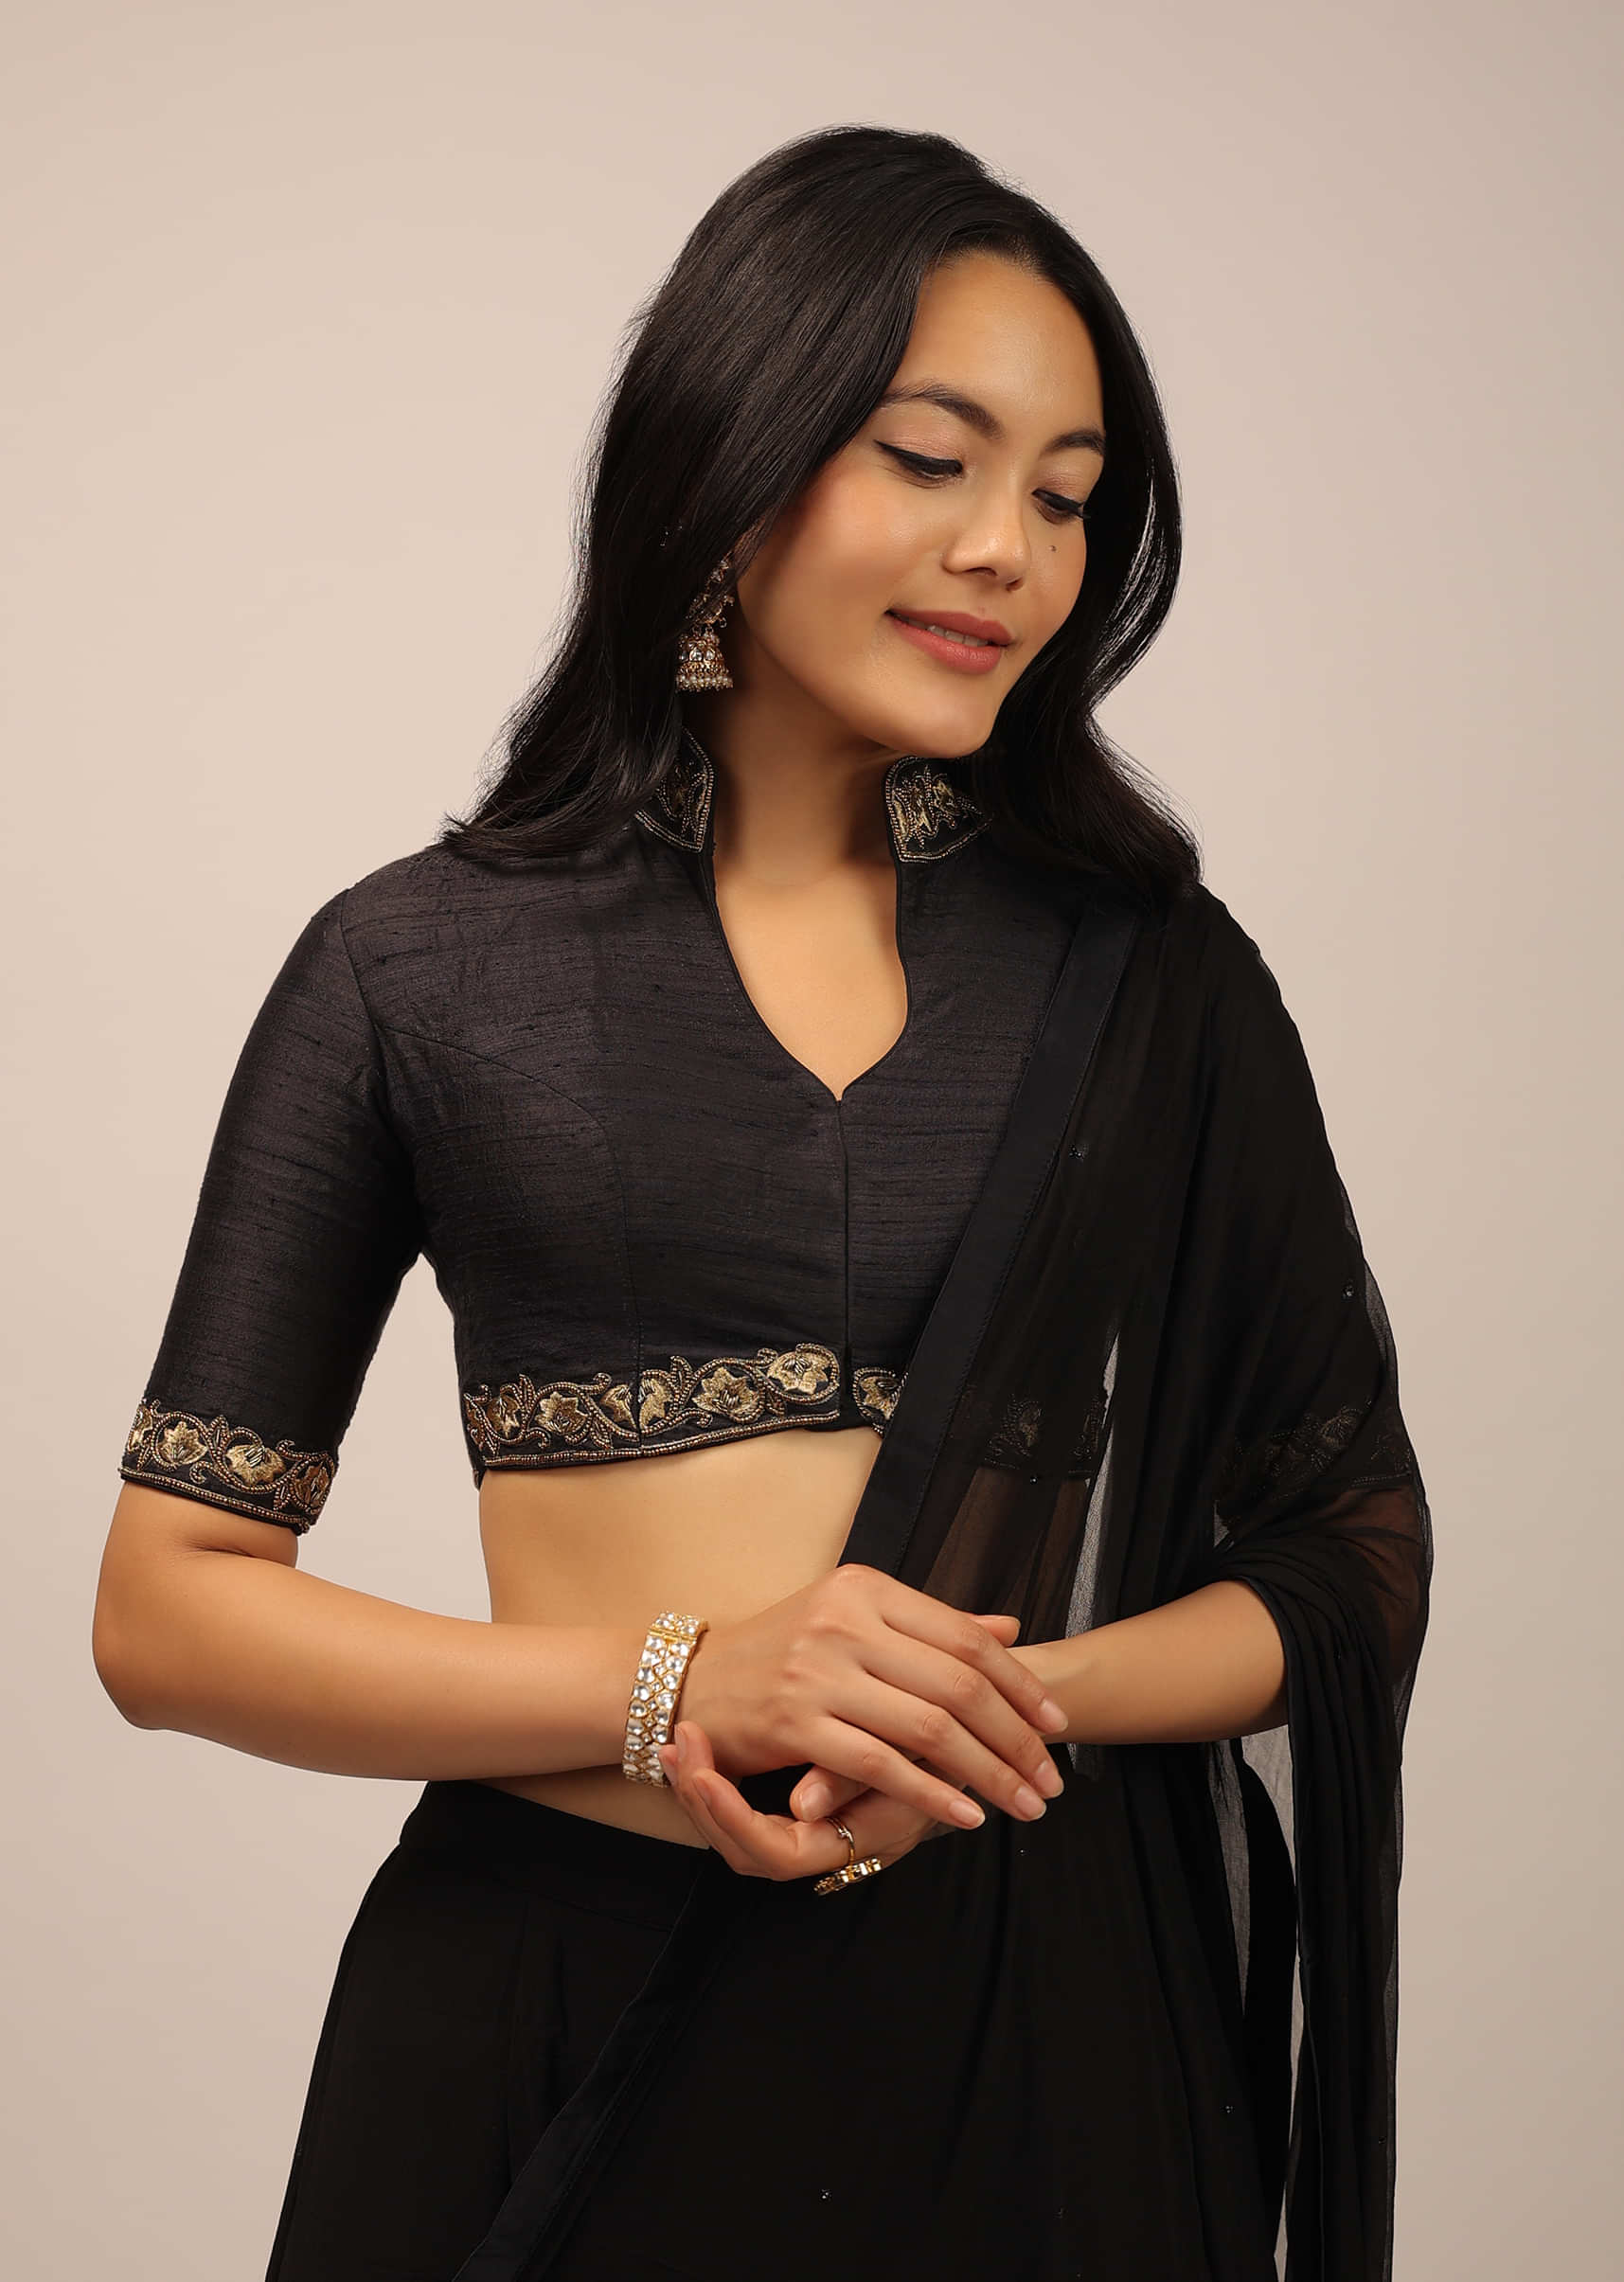 Black Blouse In Raw Silk With Resham And Cut Dana Embroidered Floral Motifs And Mandarin Collar Neckline